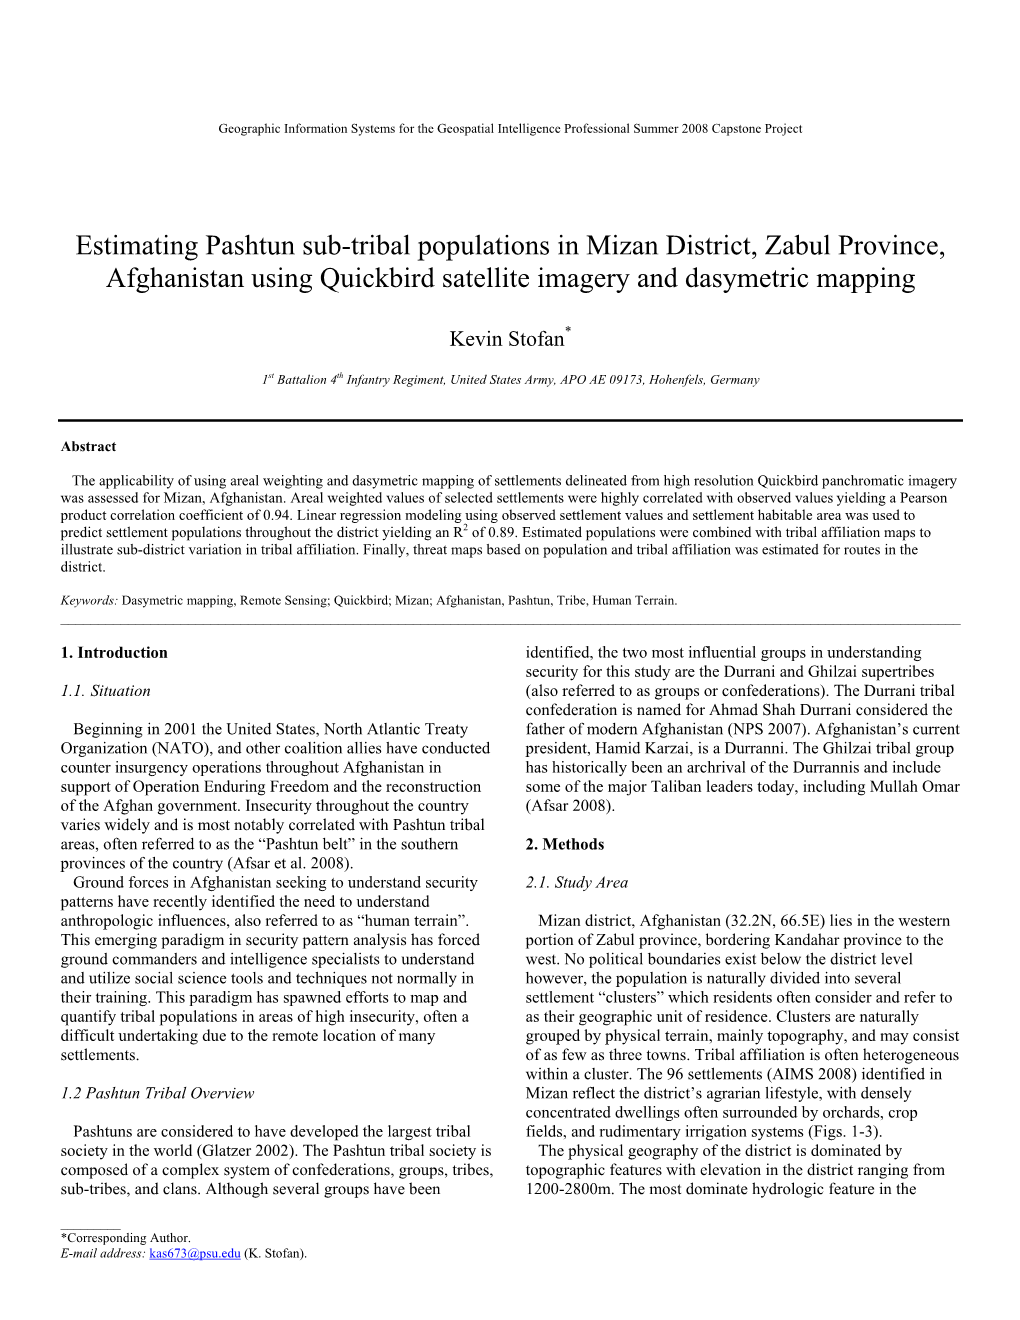 Estimating Pashtun Sub-Tribal Populations in Mizan District, Zabul Province, Afghanistan Using Quickbird Satellite Imagery and Dasymetric Mapping